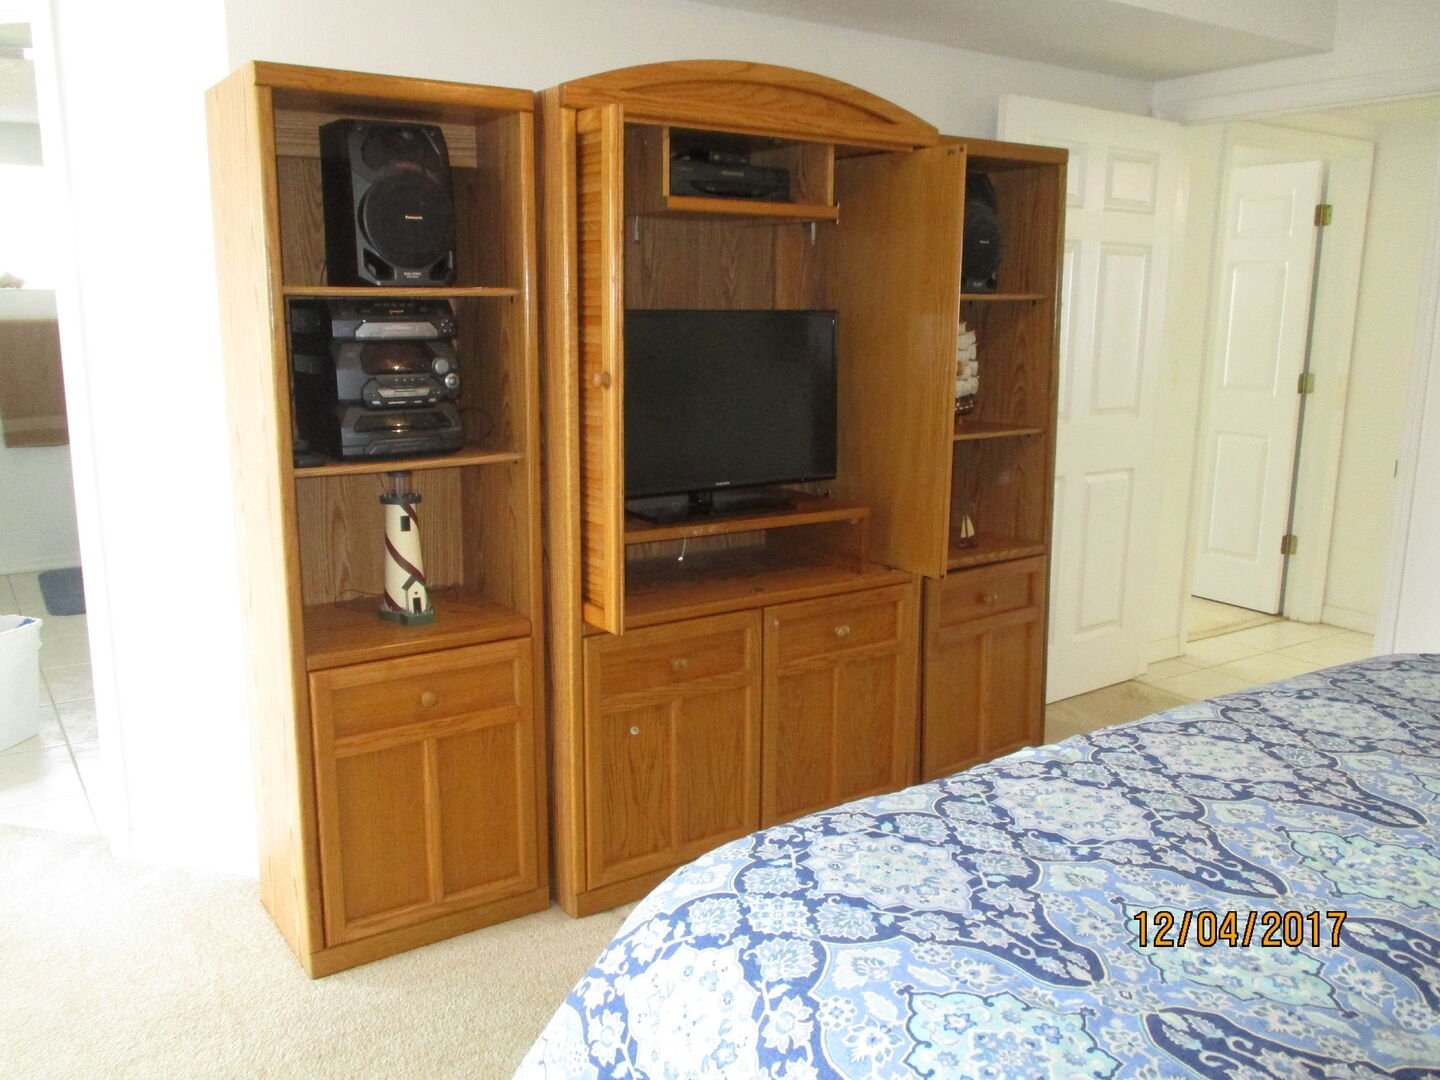 Master Bedroom - Entertainment center with CD Player and 32' TV